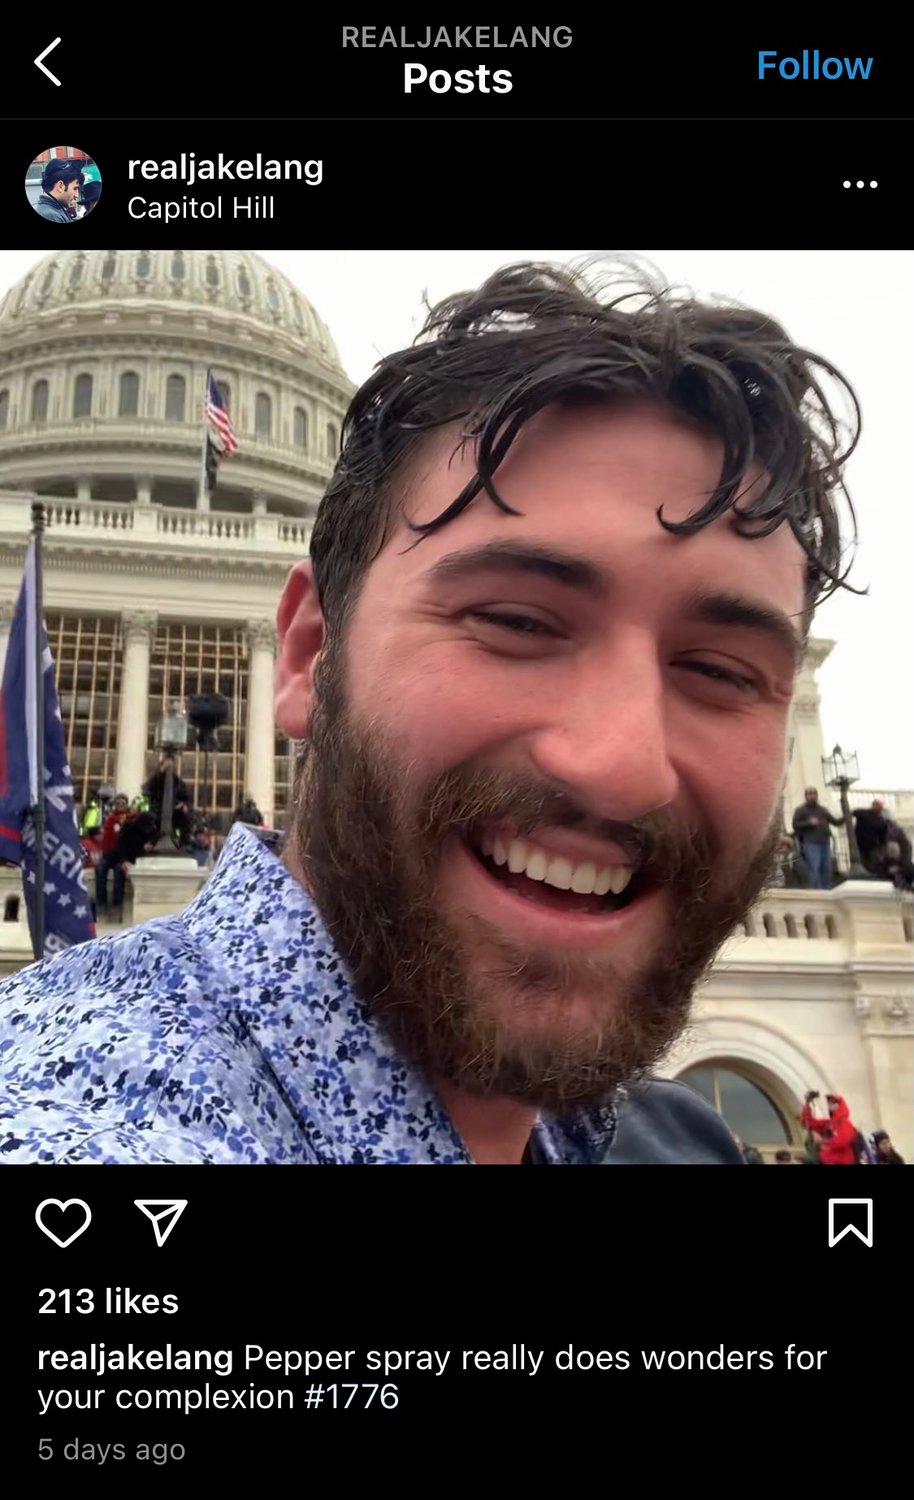 Edward Jake Lang posted this photo to his Instagram account, which is no longer available, with this caption: “Pepper spray really does wonders for your complexion.”